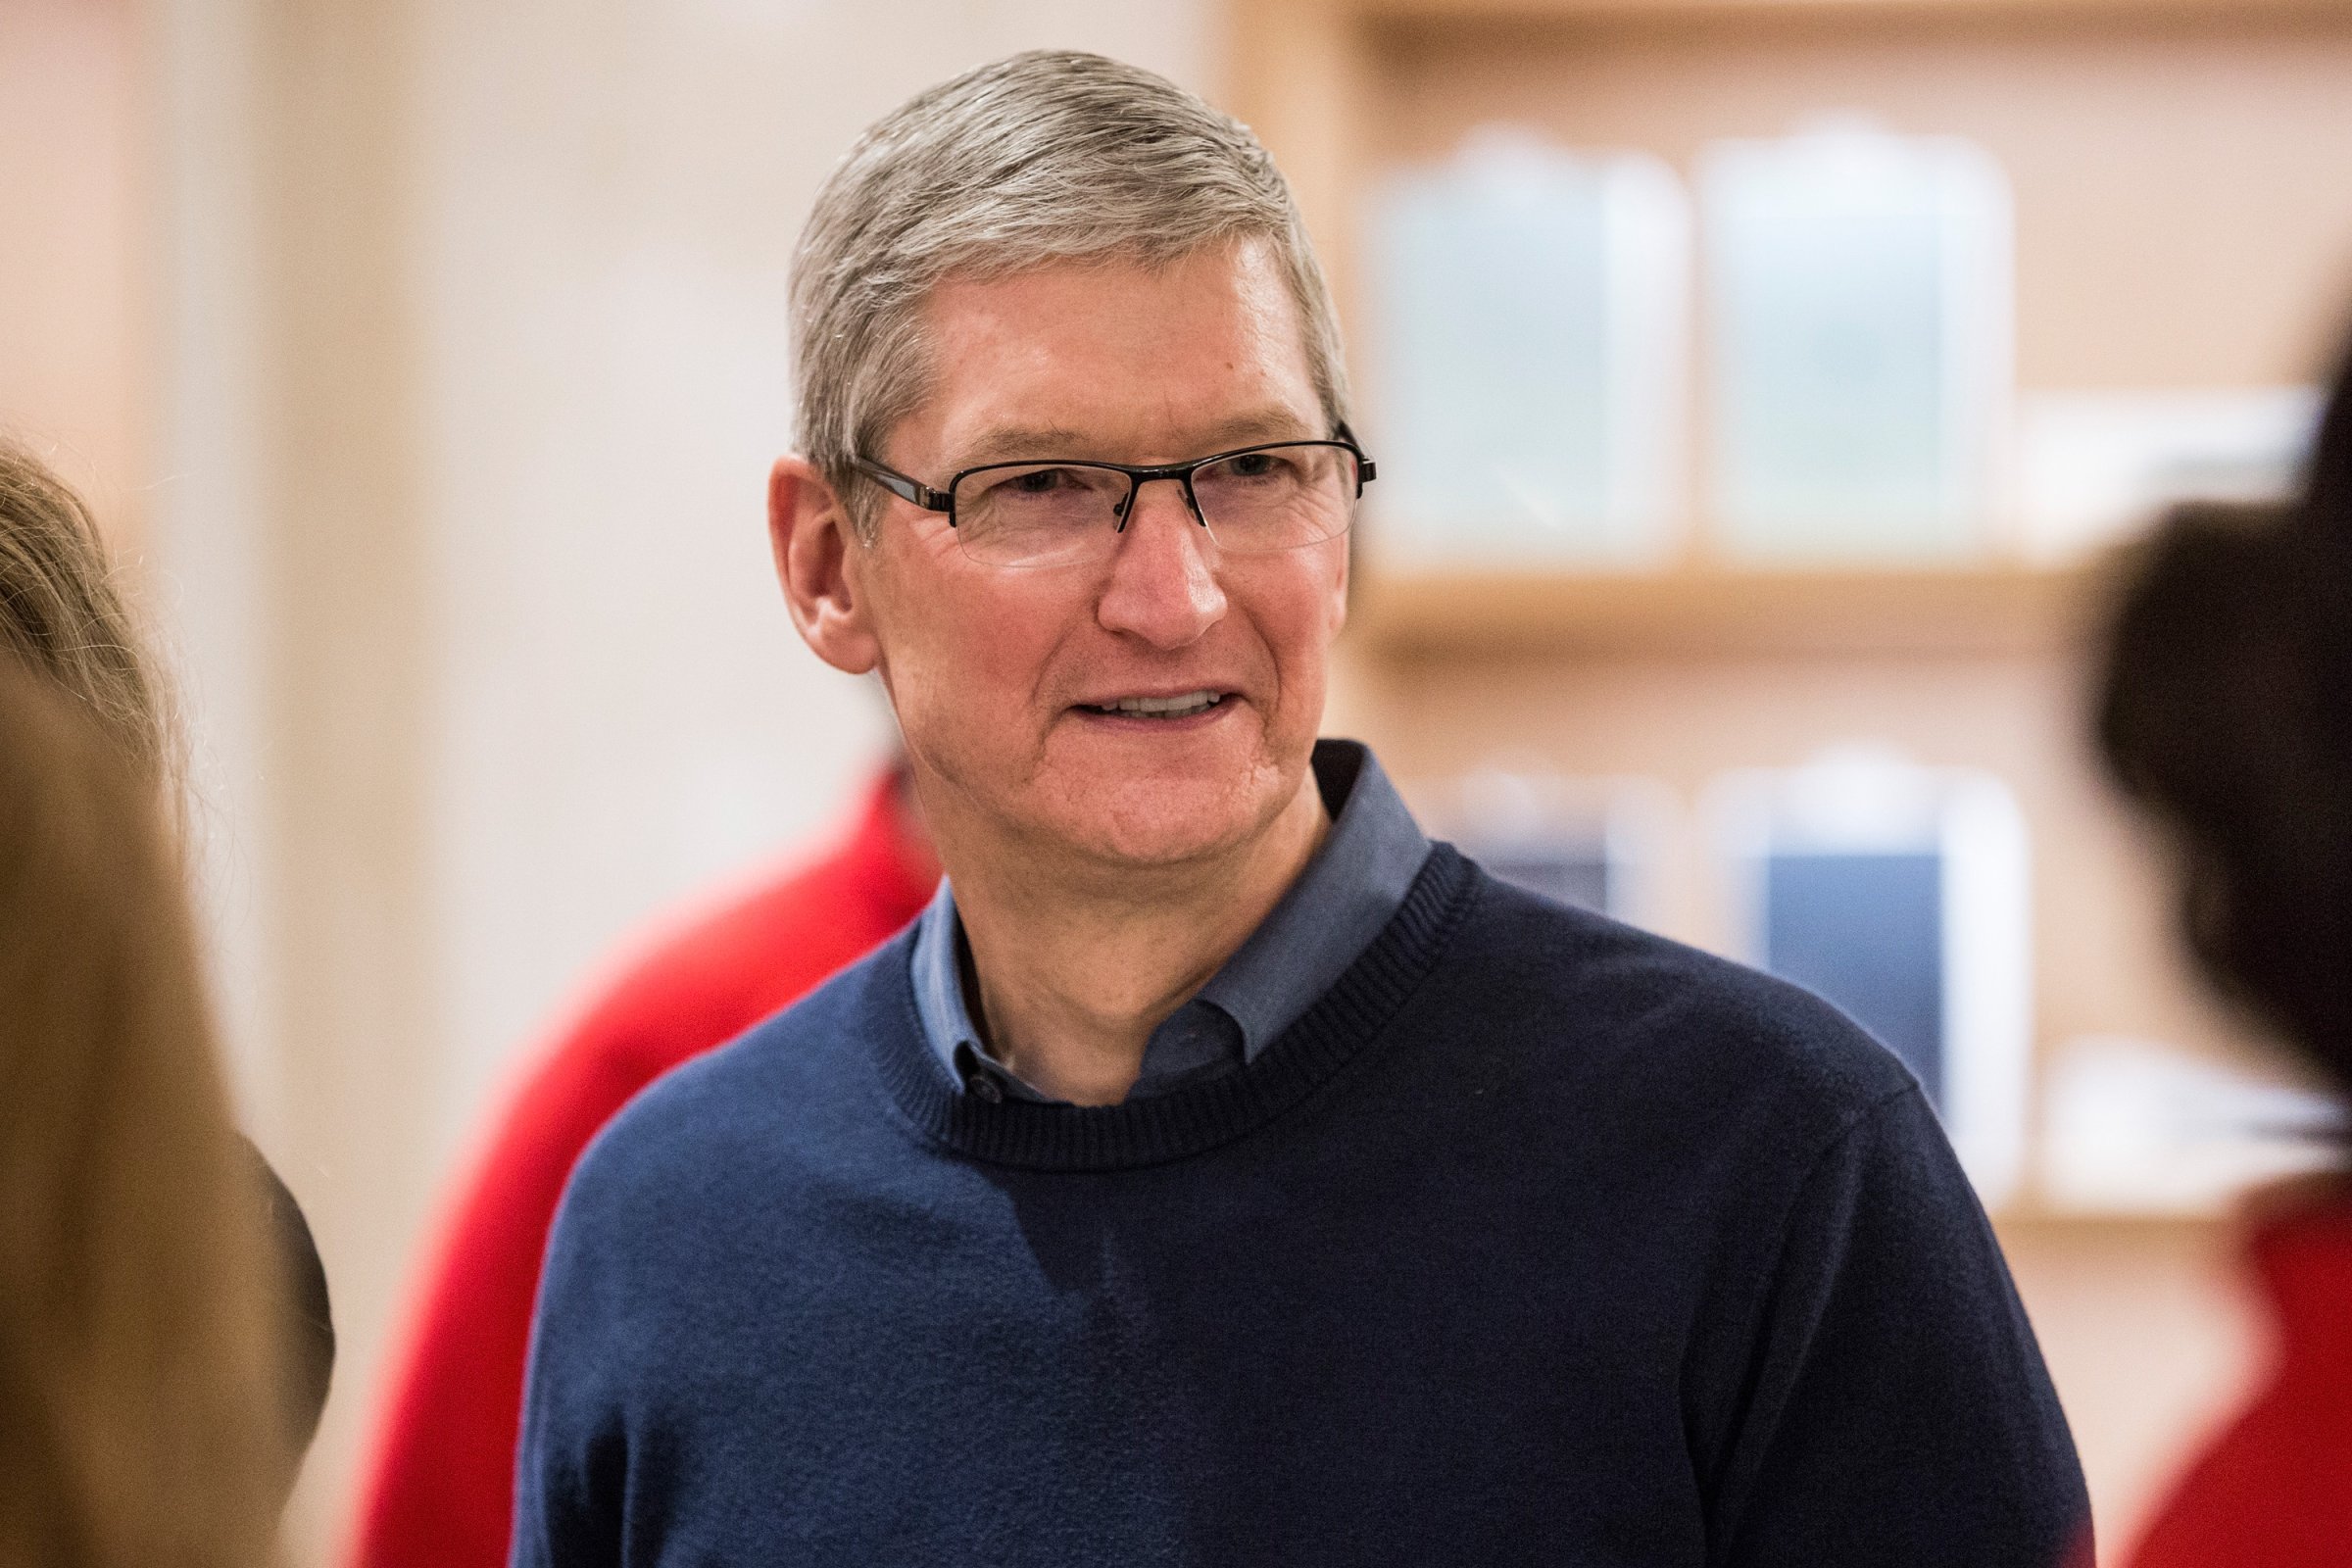 Tim Cook, CEO of Apple, visits an Apple store where third grade children from PS 57 James Weldon Johnson Leadership Academy are learning how to code through Apple's "Hour of Code" workshop program on December 9, 2015 in New York City.